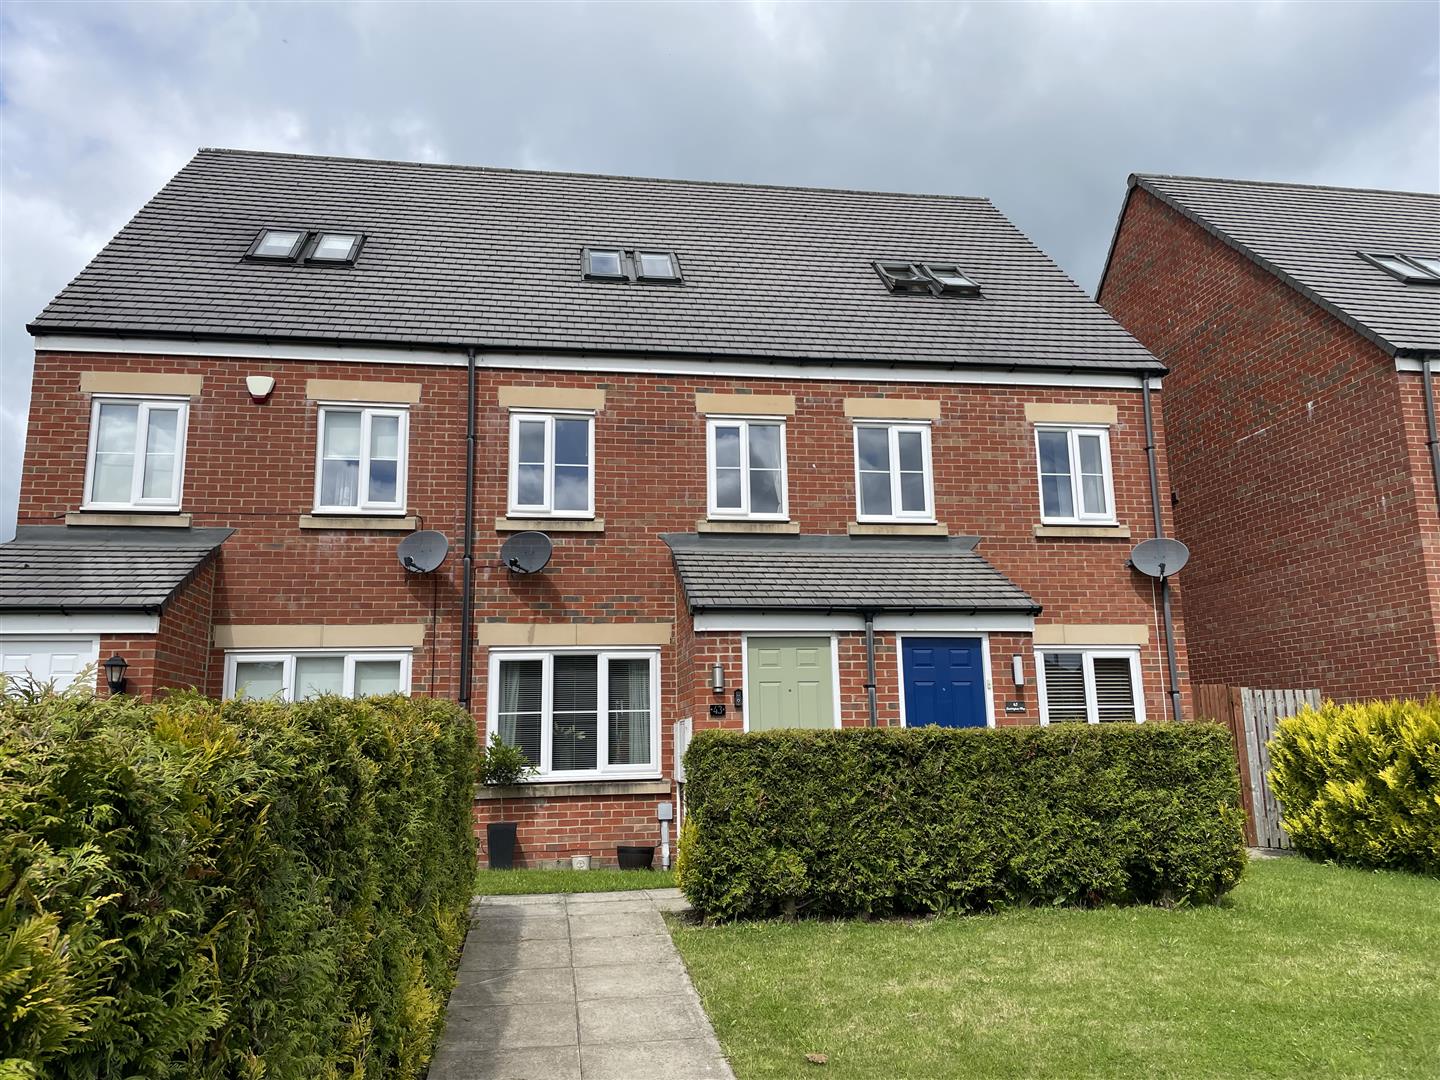 Sandringham Way, Newfield, Chester Le Street